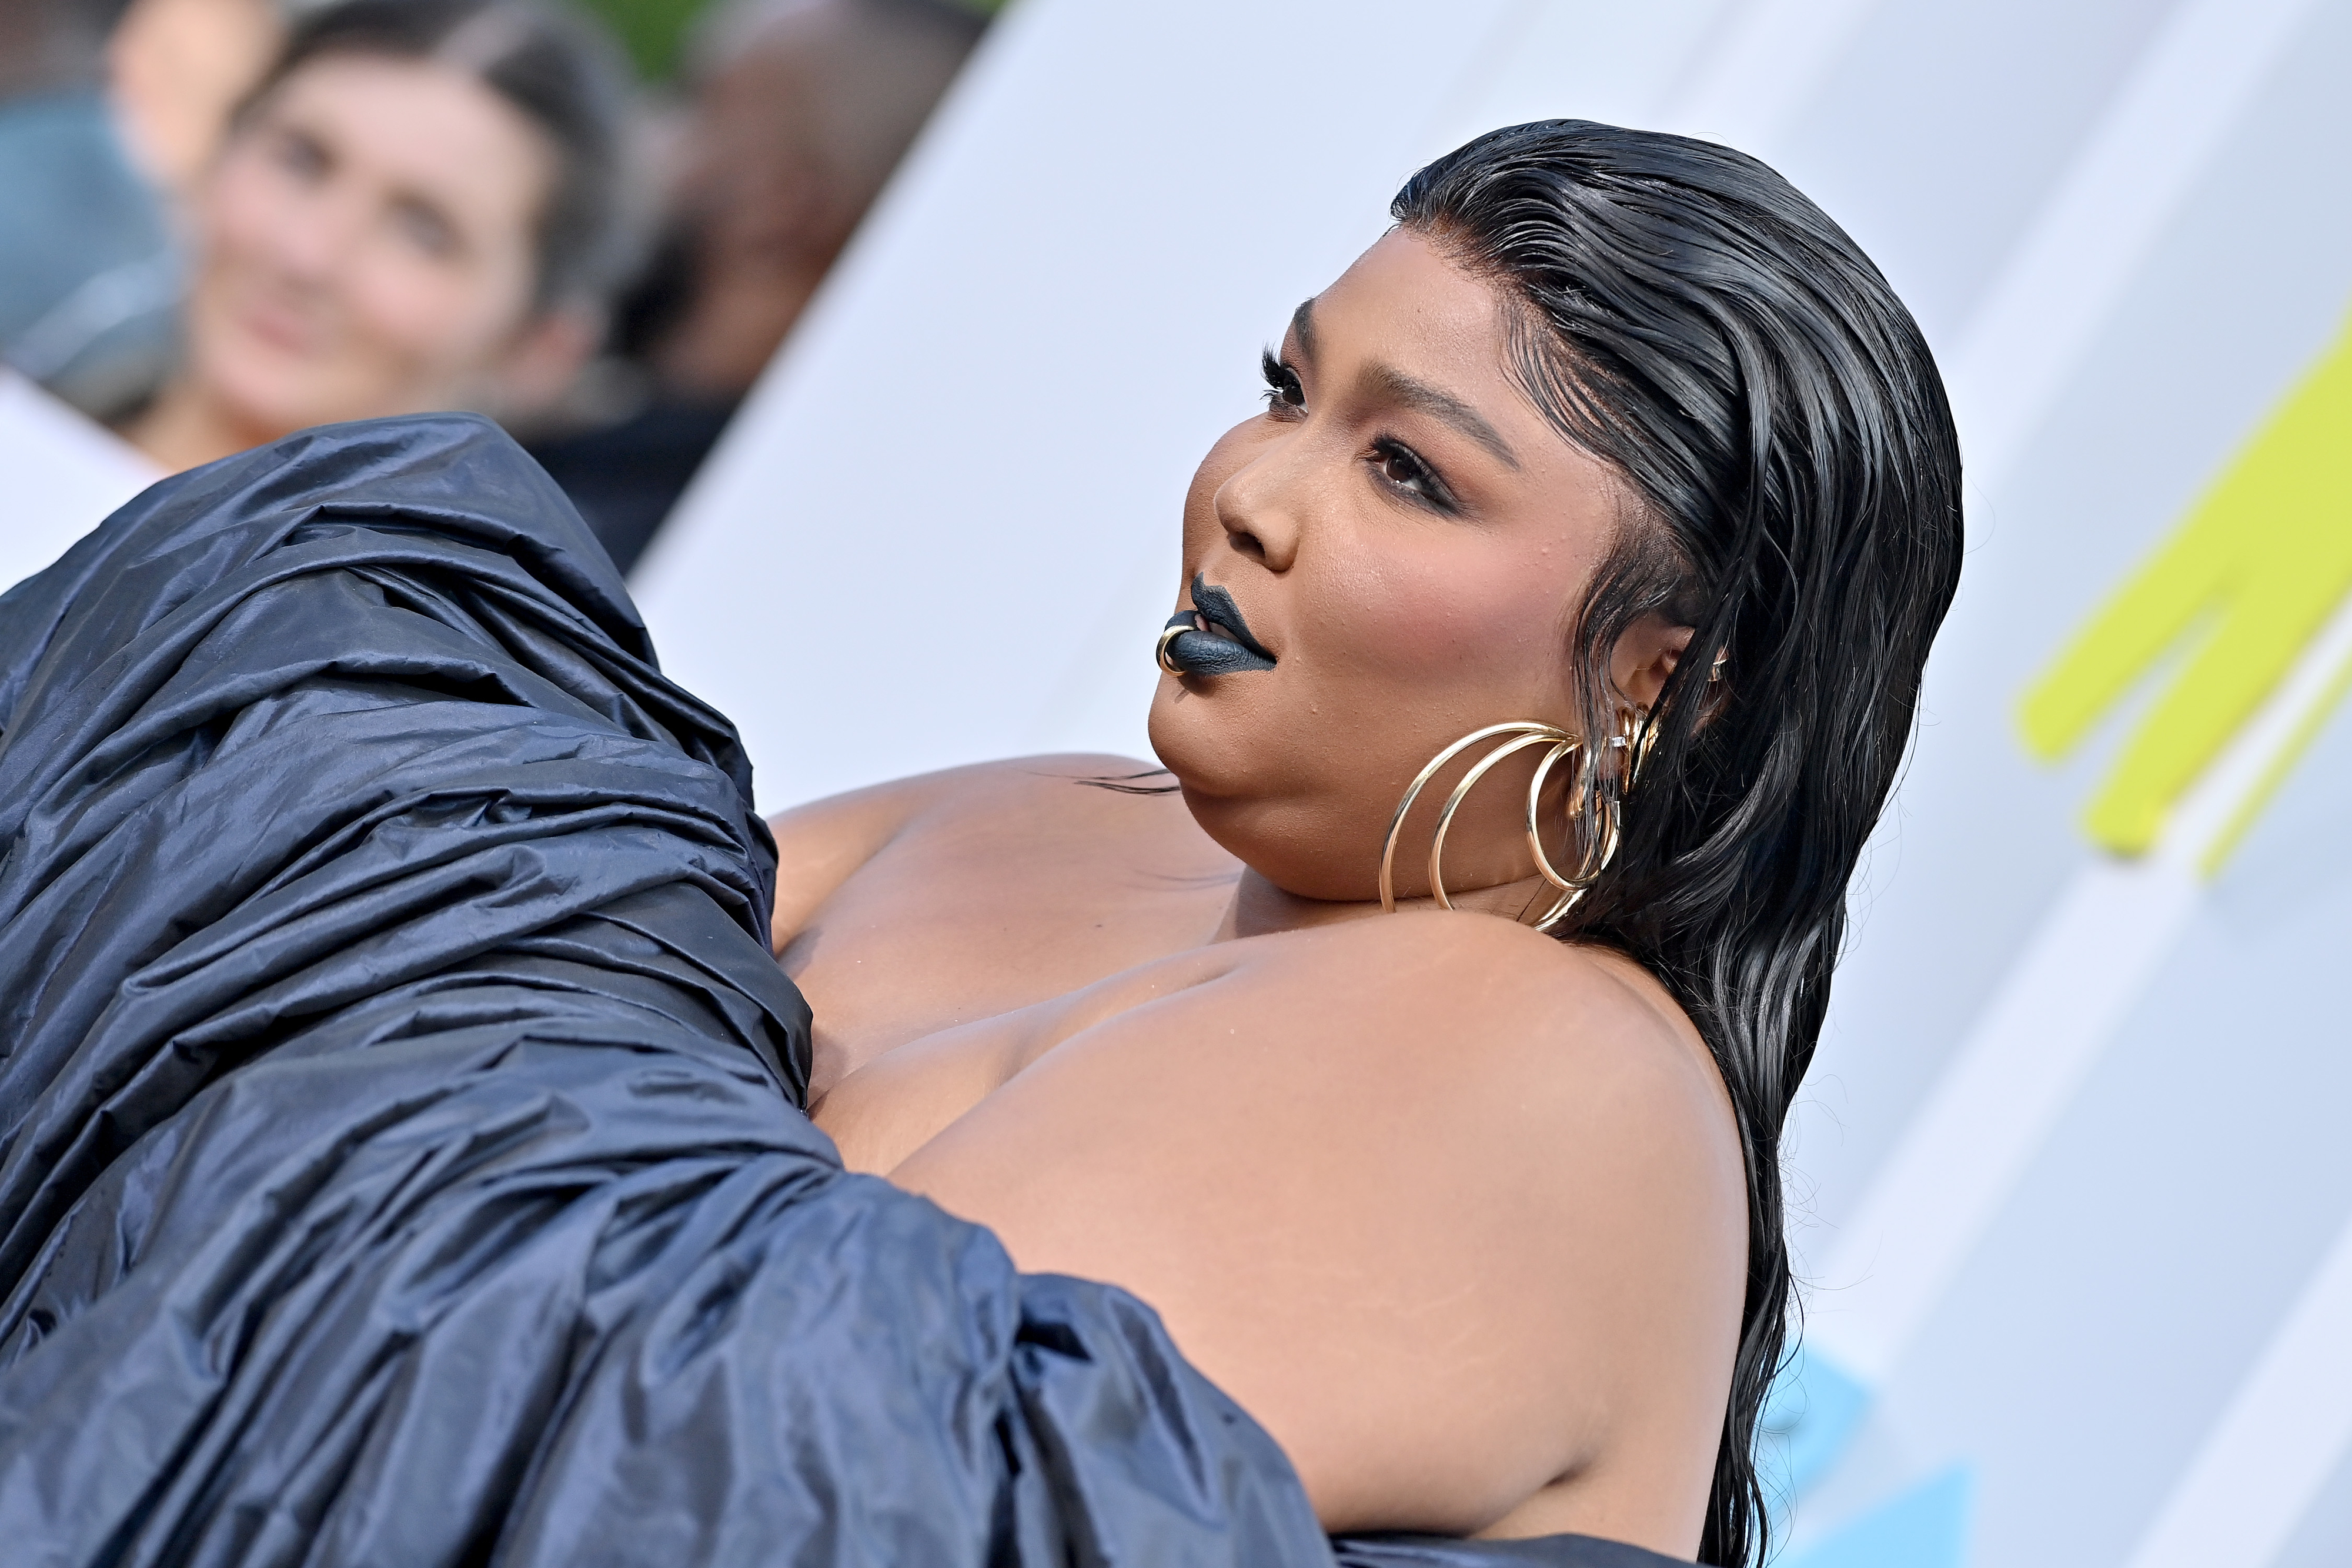 lizzo at an event